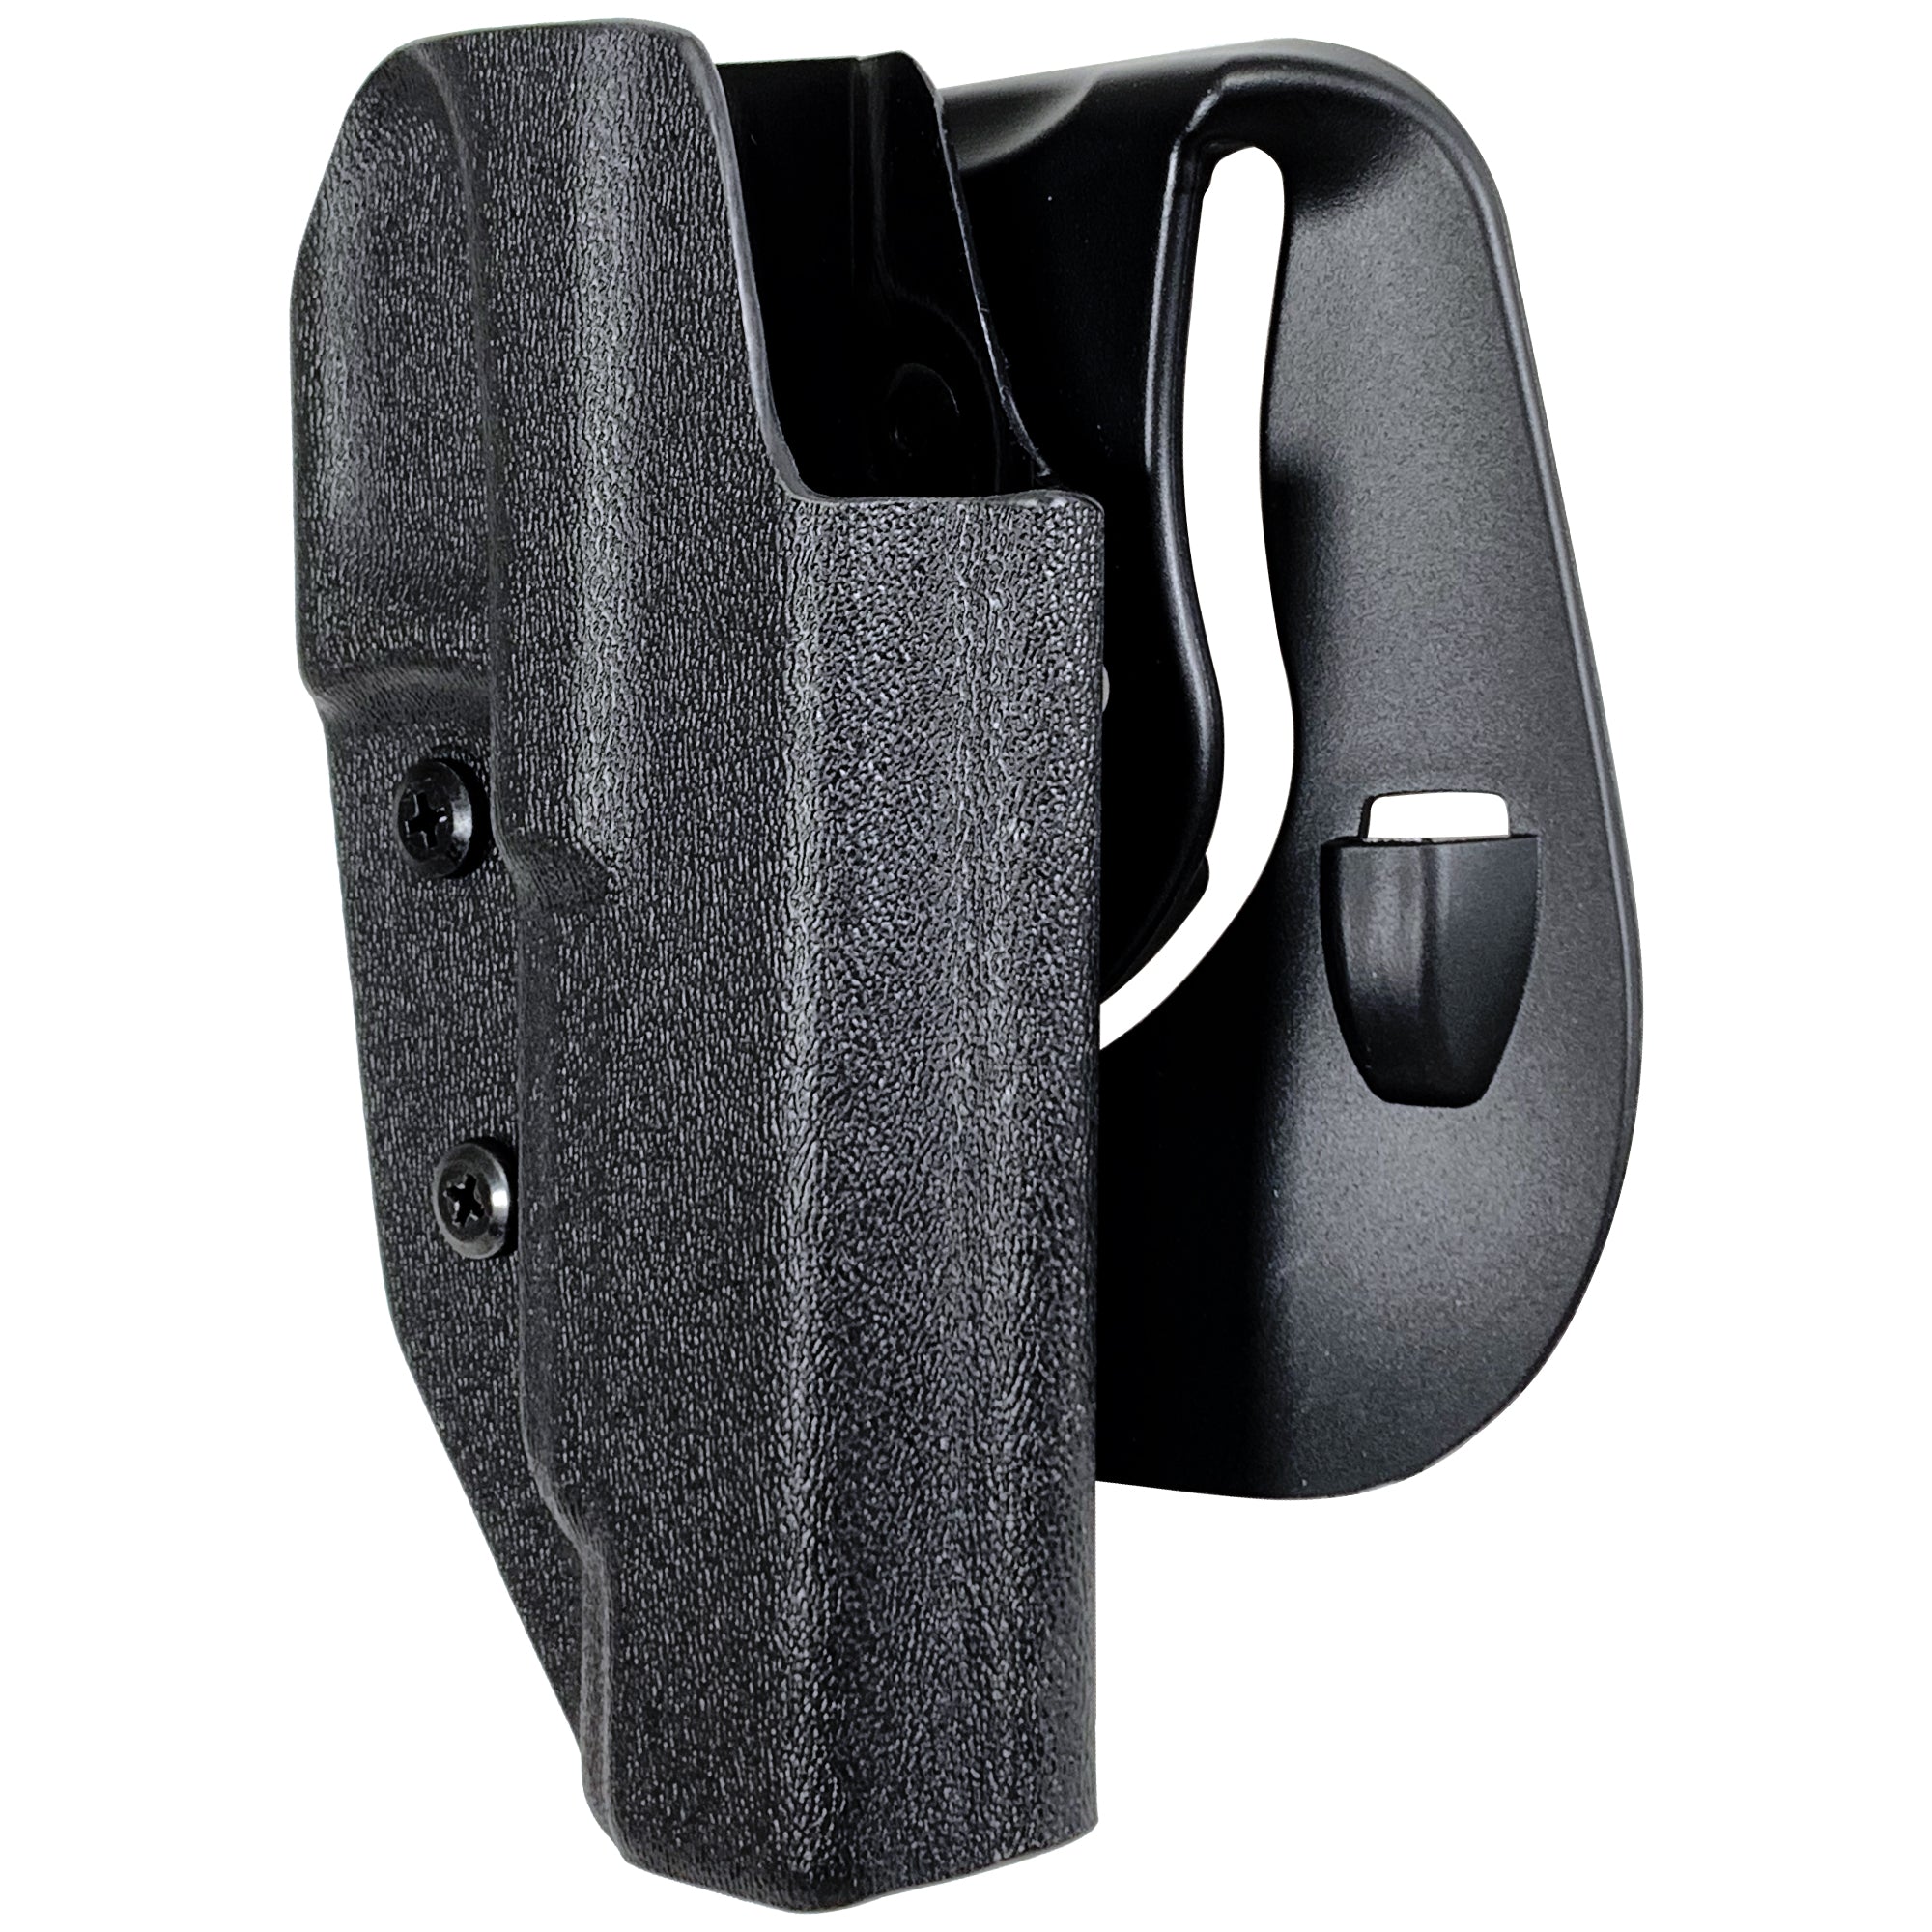 Canik TP9SFx OWB Paddle Holster